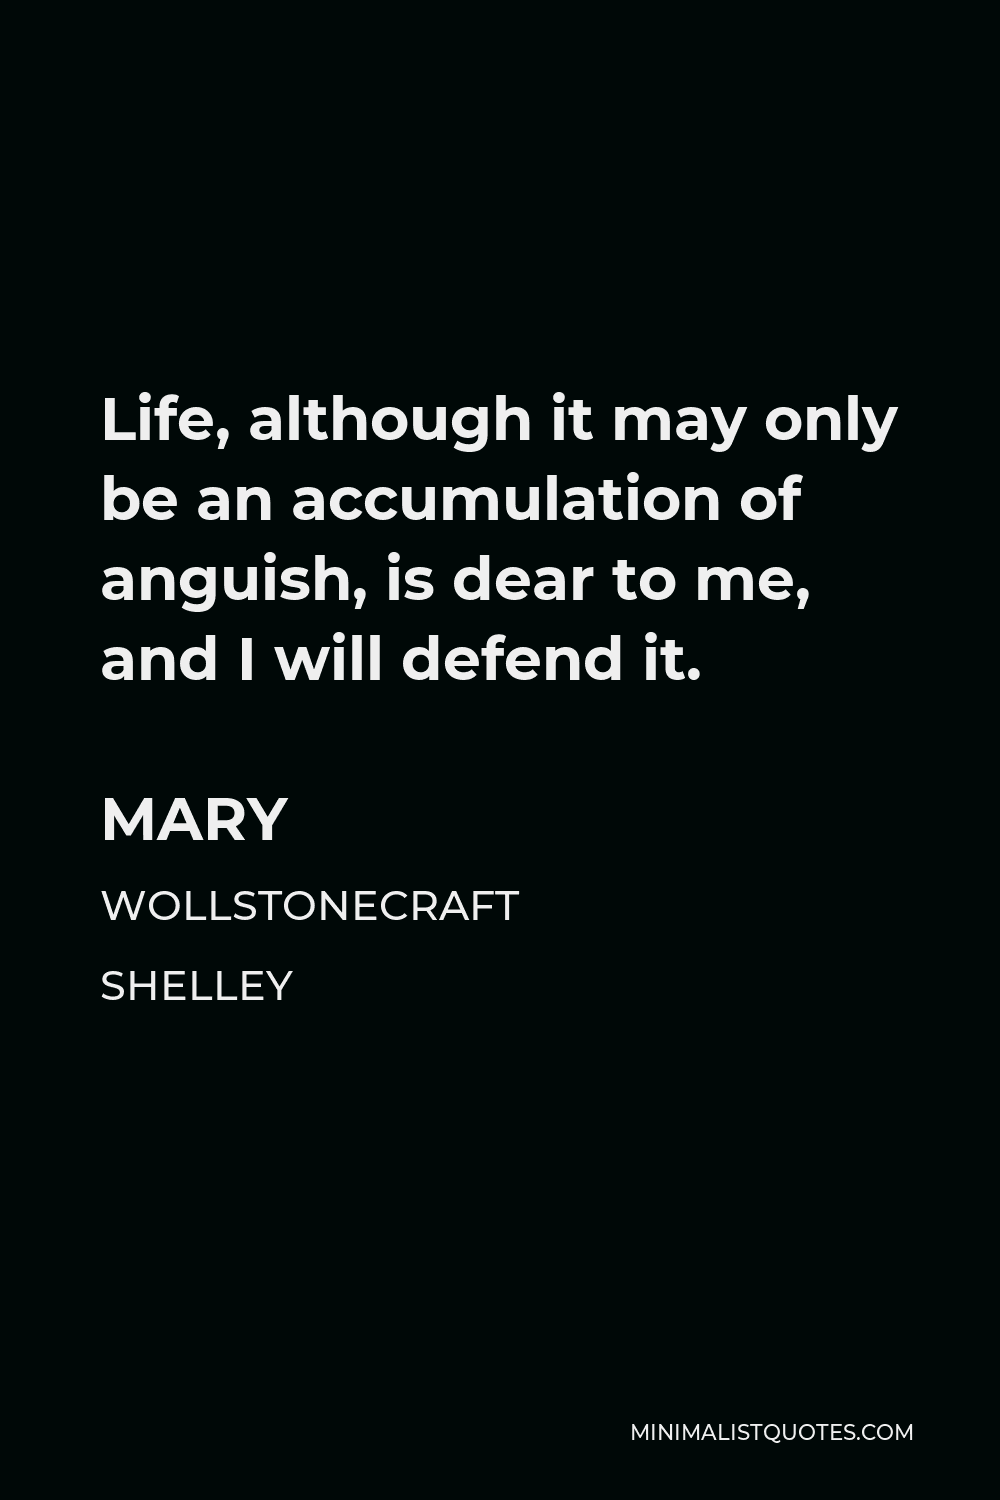 Mary Wollstonecraft Shelley Quote - Life, although it may only be an accumulation of anguish, is dear to me, and I will defend it.